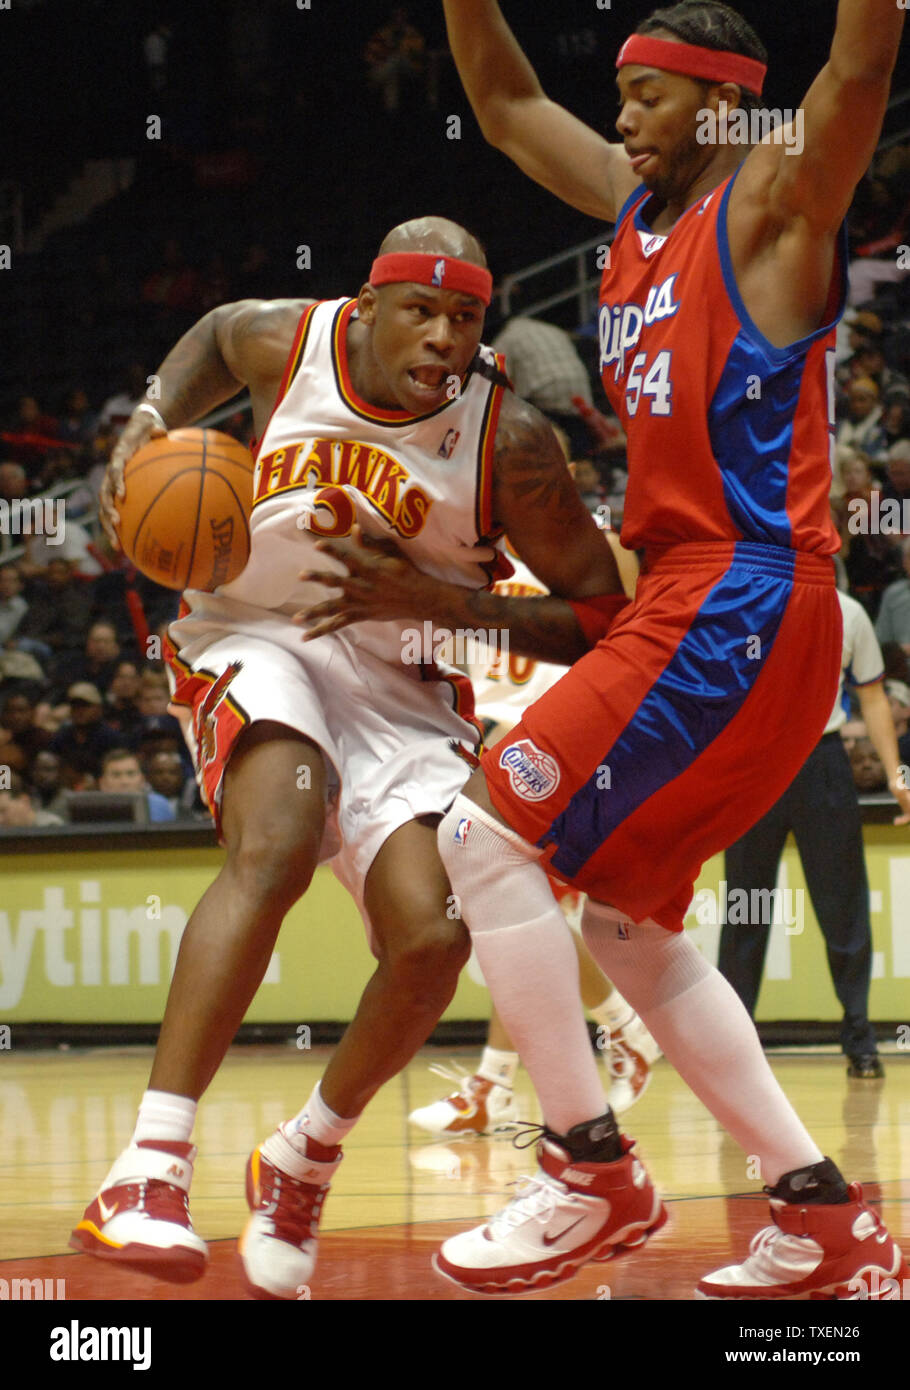 Atlanta Hawks forward Al Harrington (3) moves against L.A. Clippers  defender Chris Wilcox (54) in the second periiod of play against the L.A.  Clippers November 10, 2005, in Atlanta's Phillips Arena. The